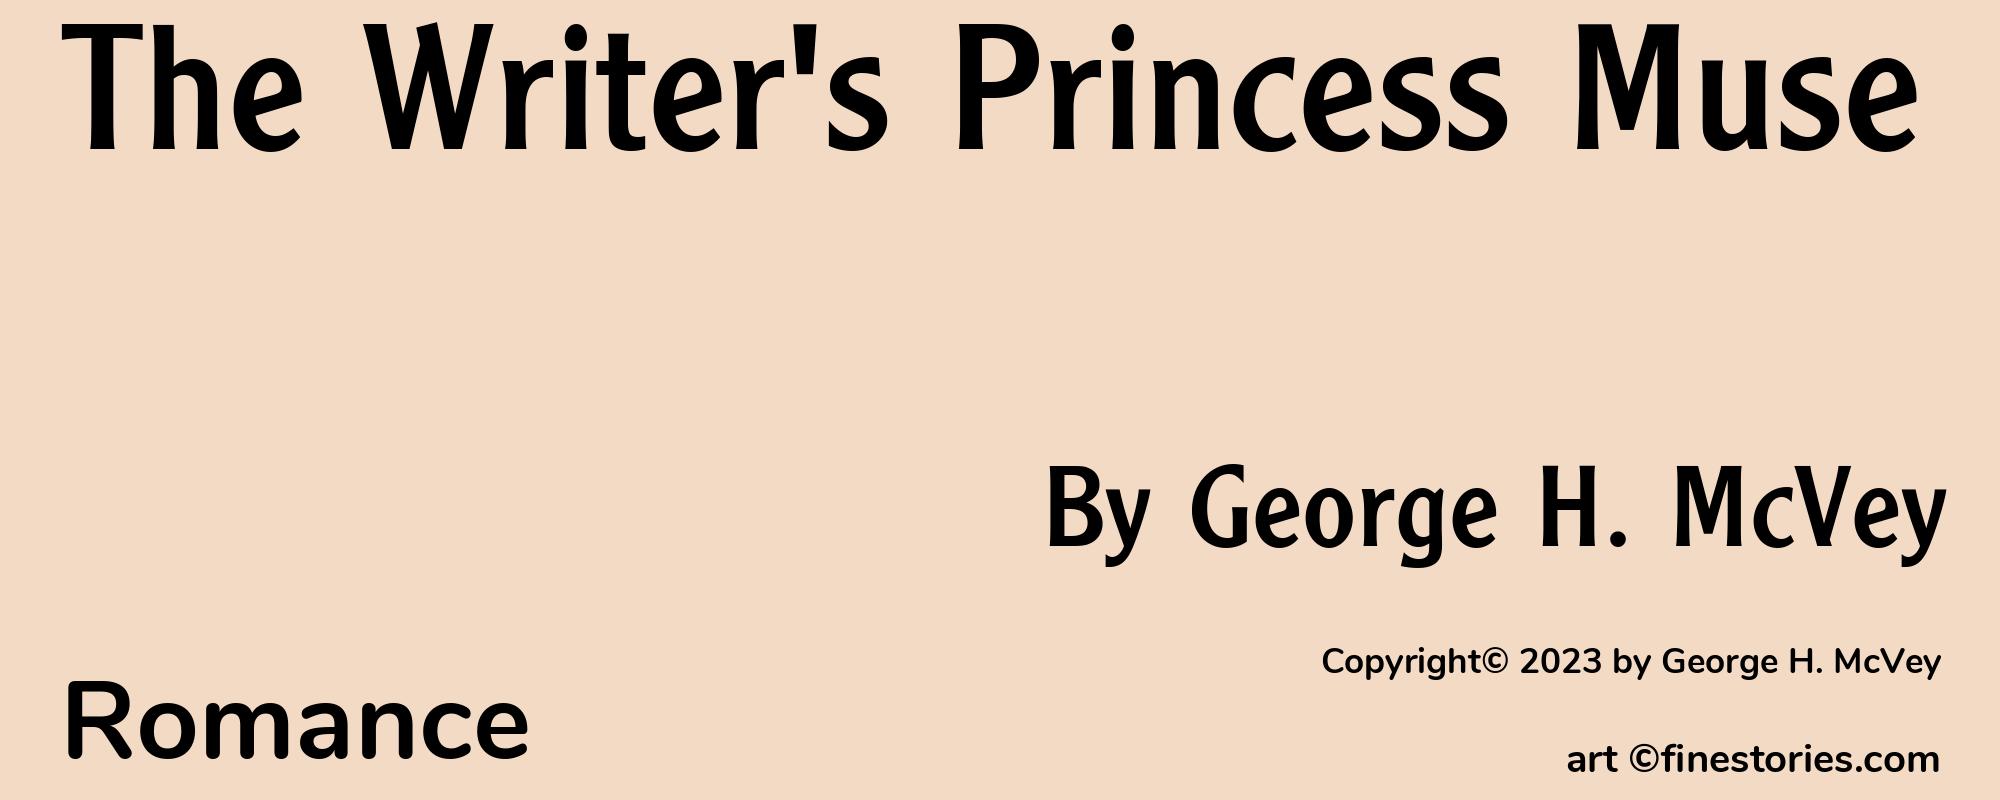 The Writer's Princess Muse - Cover